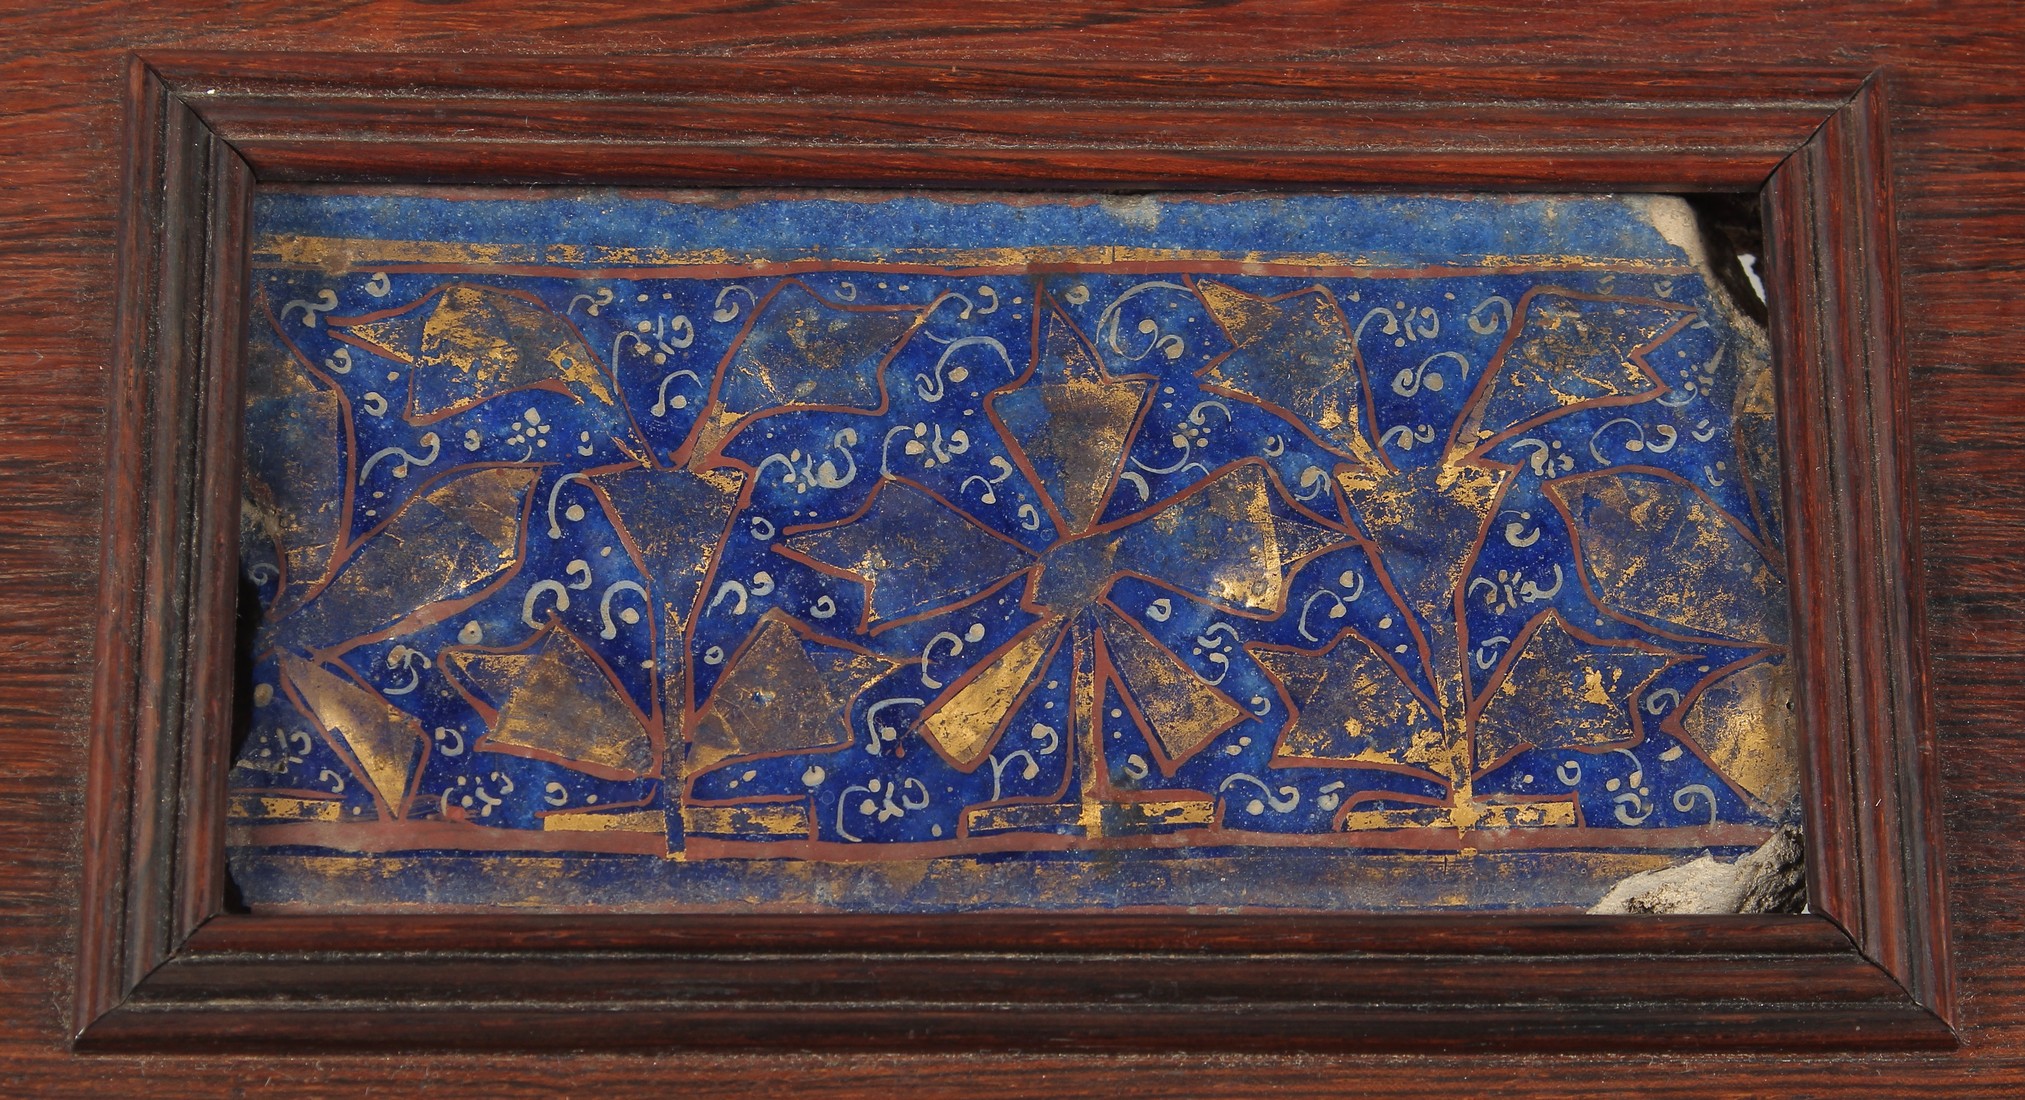 FOUR 12TH/13TH CENTURY PERSIAN LAJVARDINA AND KASHAN LUSTRE POTTERY TILES, united in a wooden frame, - Image 2 of 6